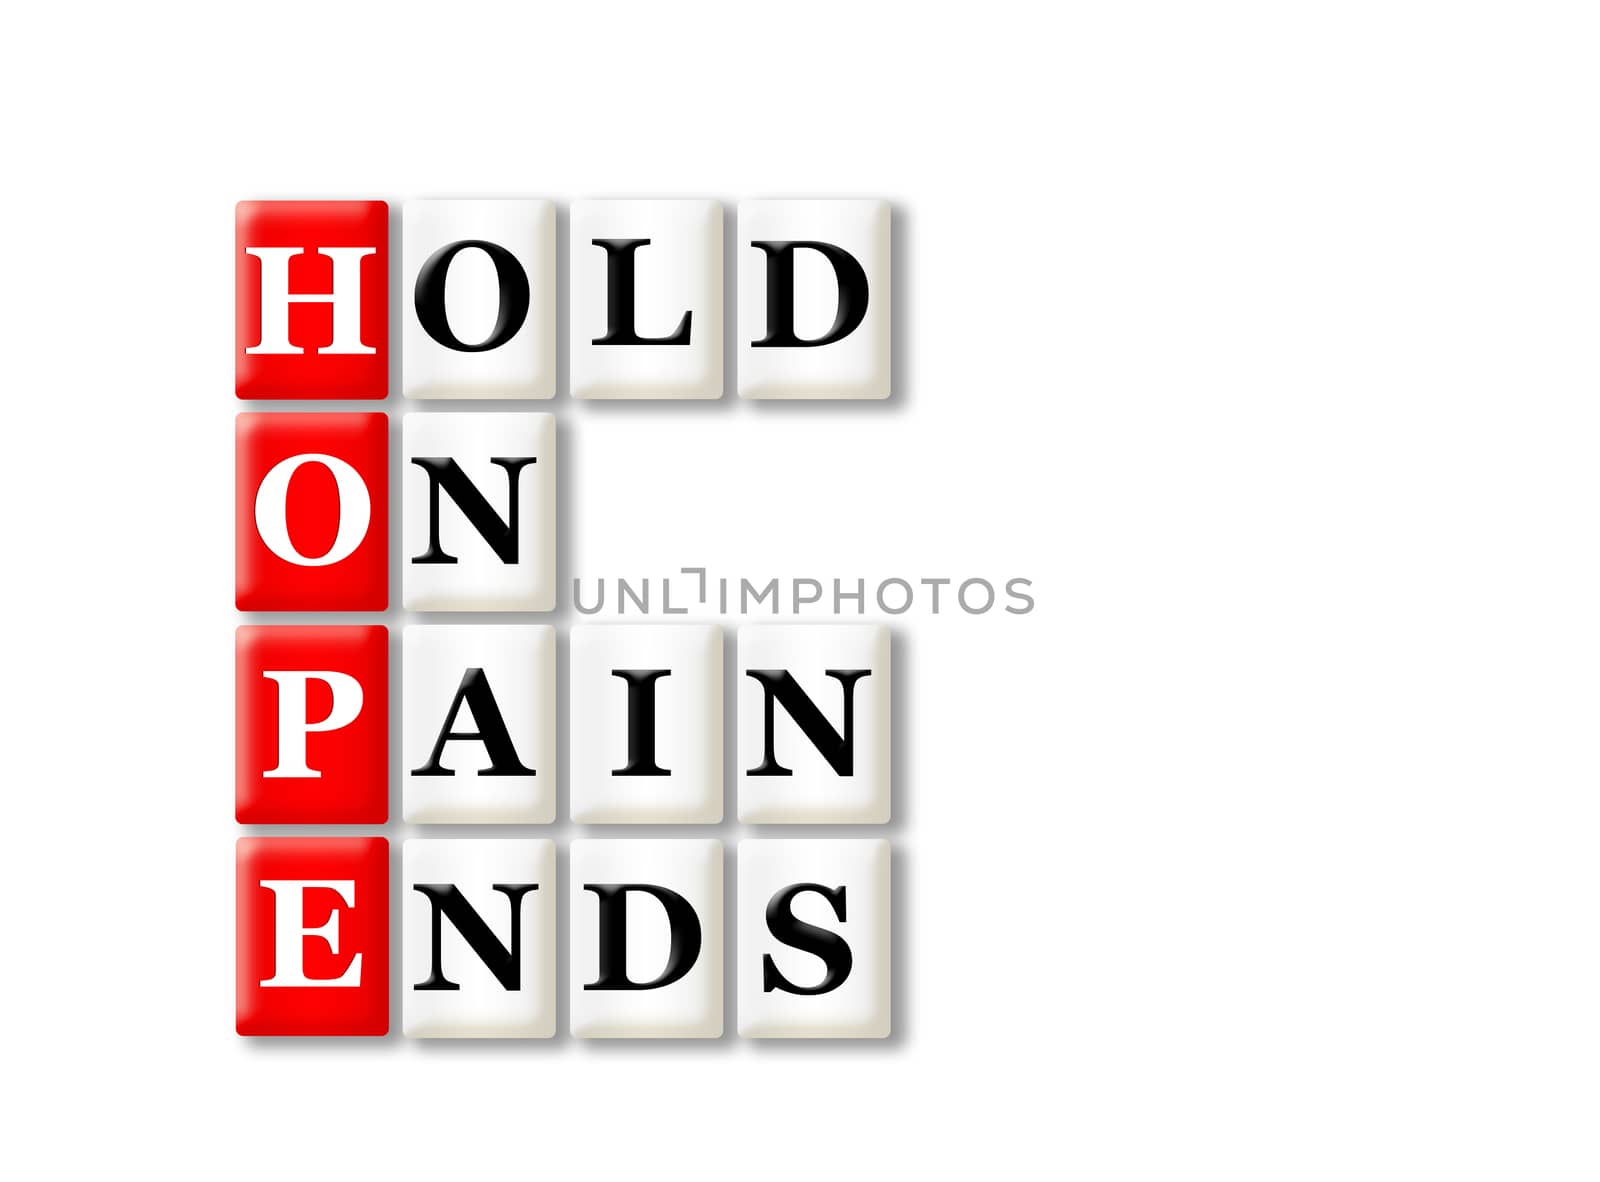 Acronym concept of Hope and other releated words